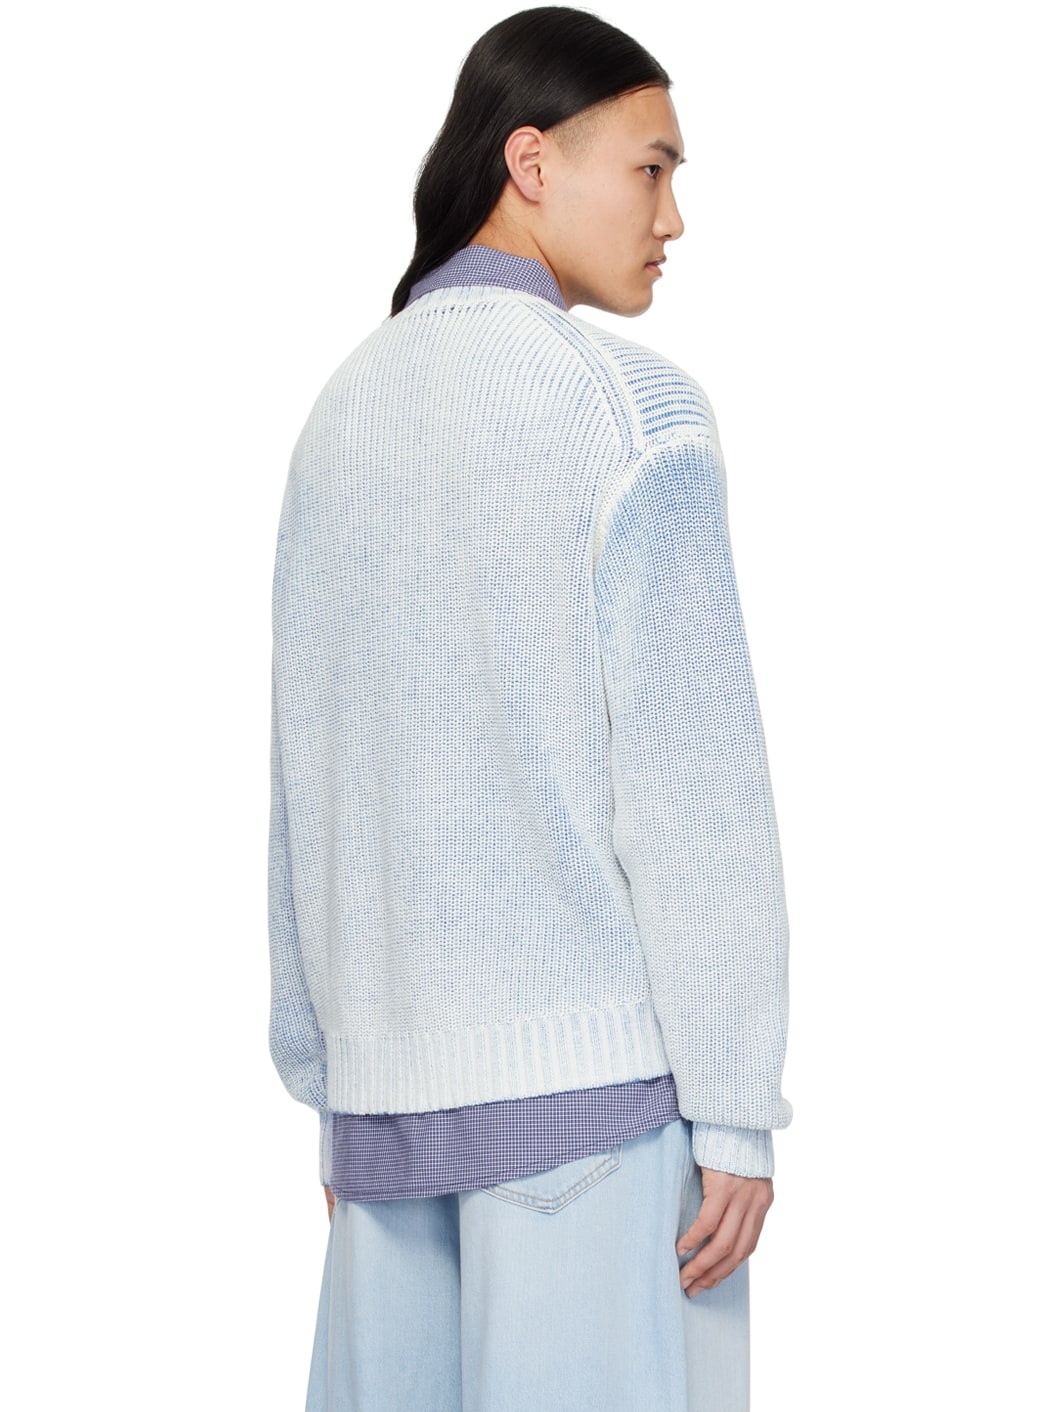 Blue Patch Sweater - 3